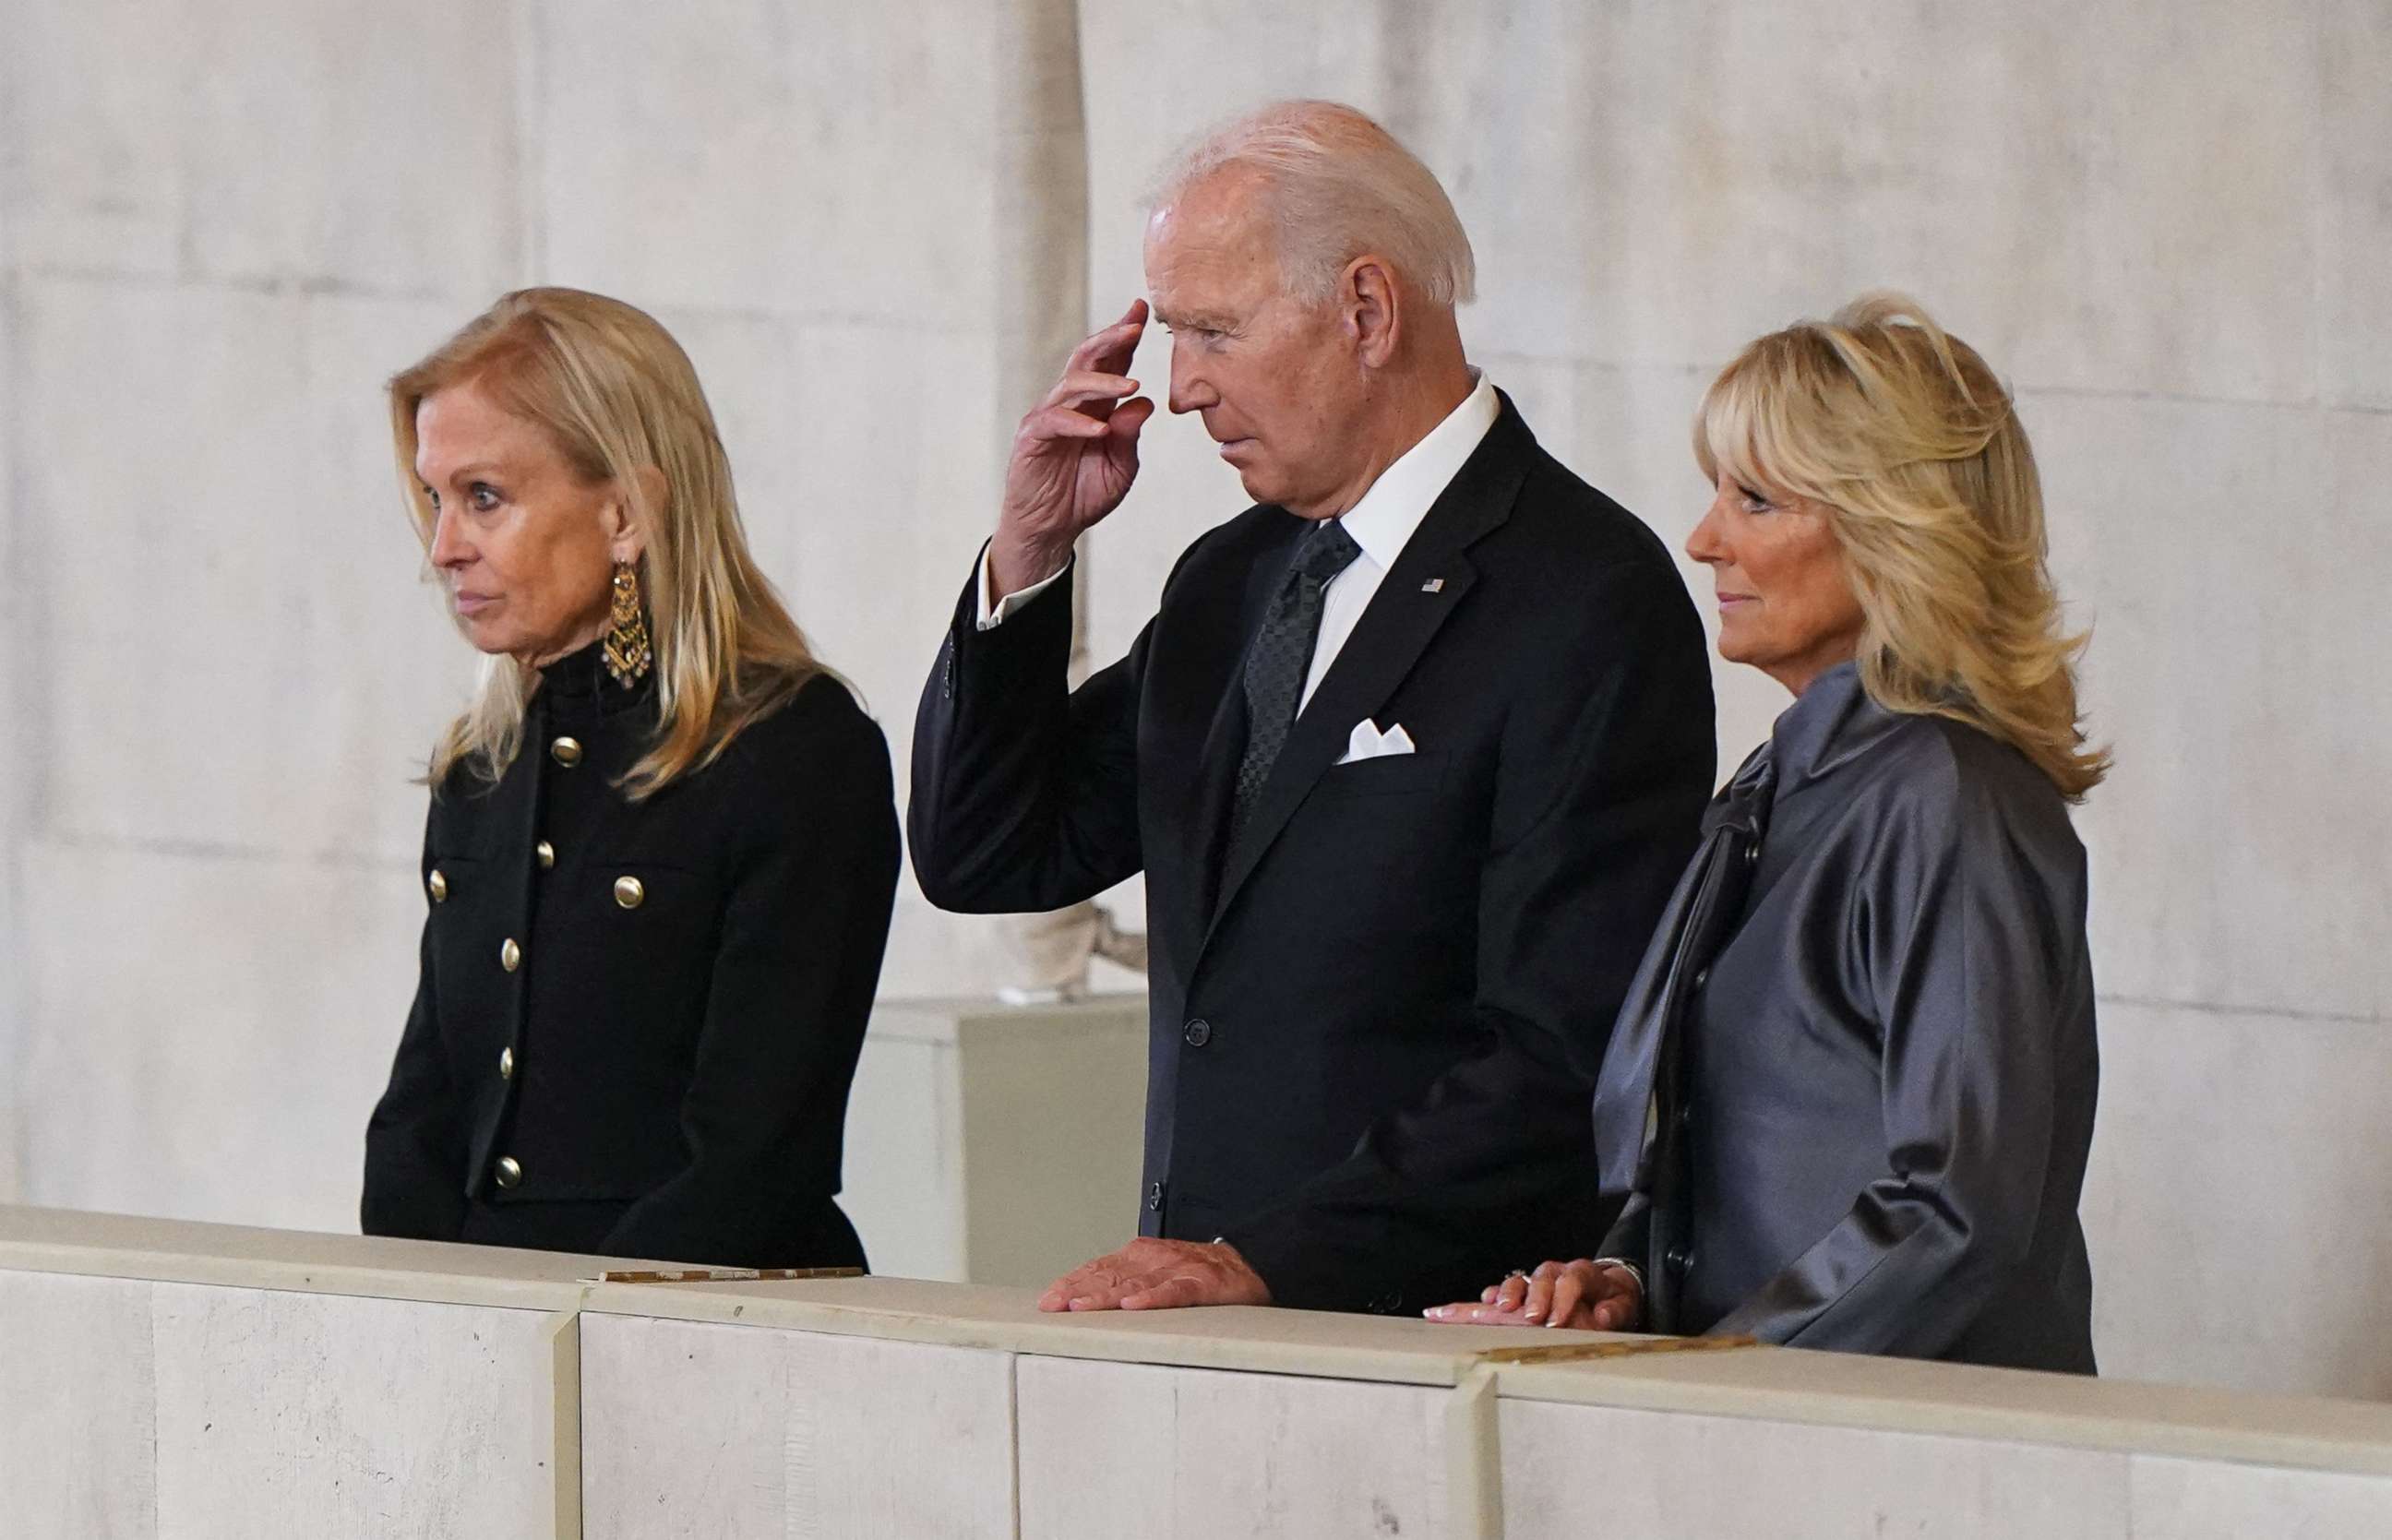 PHOTO: President Joe Biden and First Lady Jill Biden pay their respects as they view the coffin of Queen Elizabeth II, as it Lies in State inside Westminster Hall, at the Palace of Westminster in London on Sept. 18, 2022.